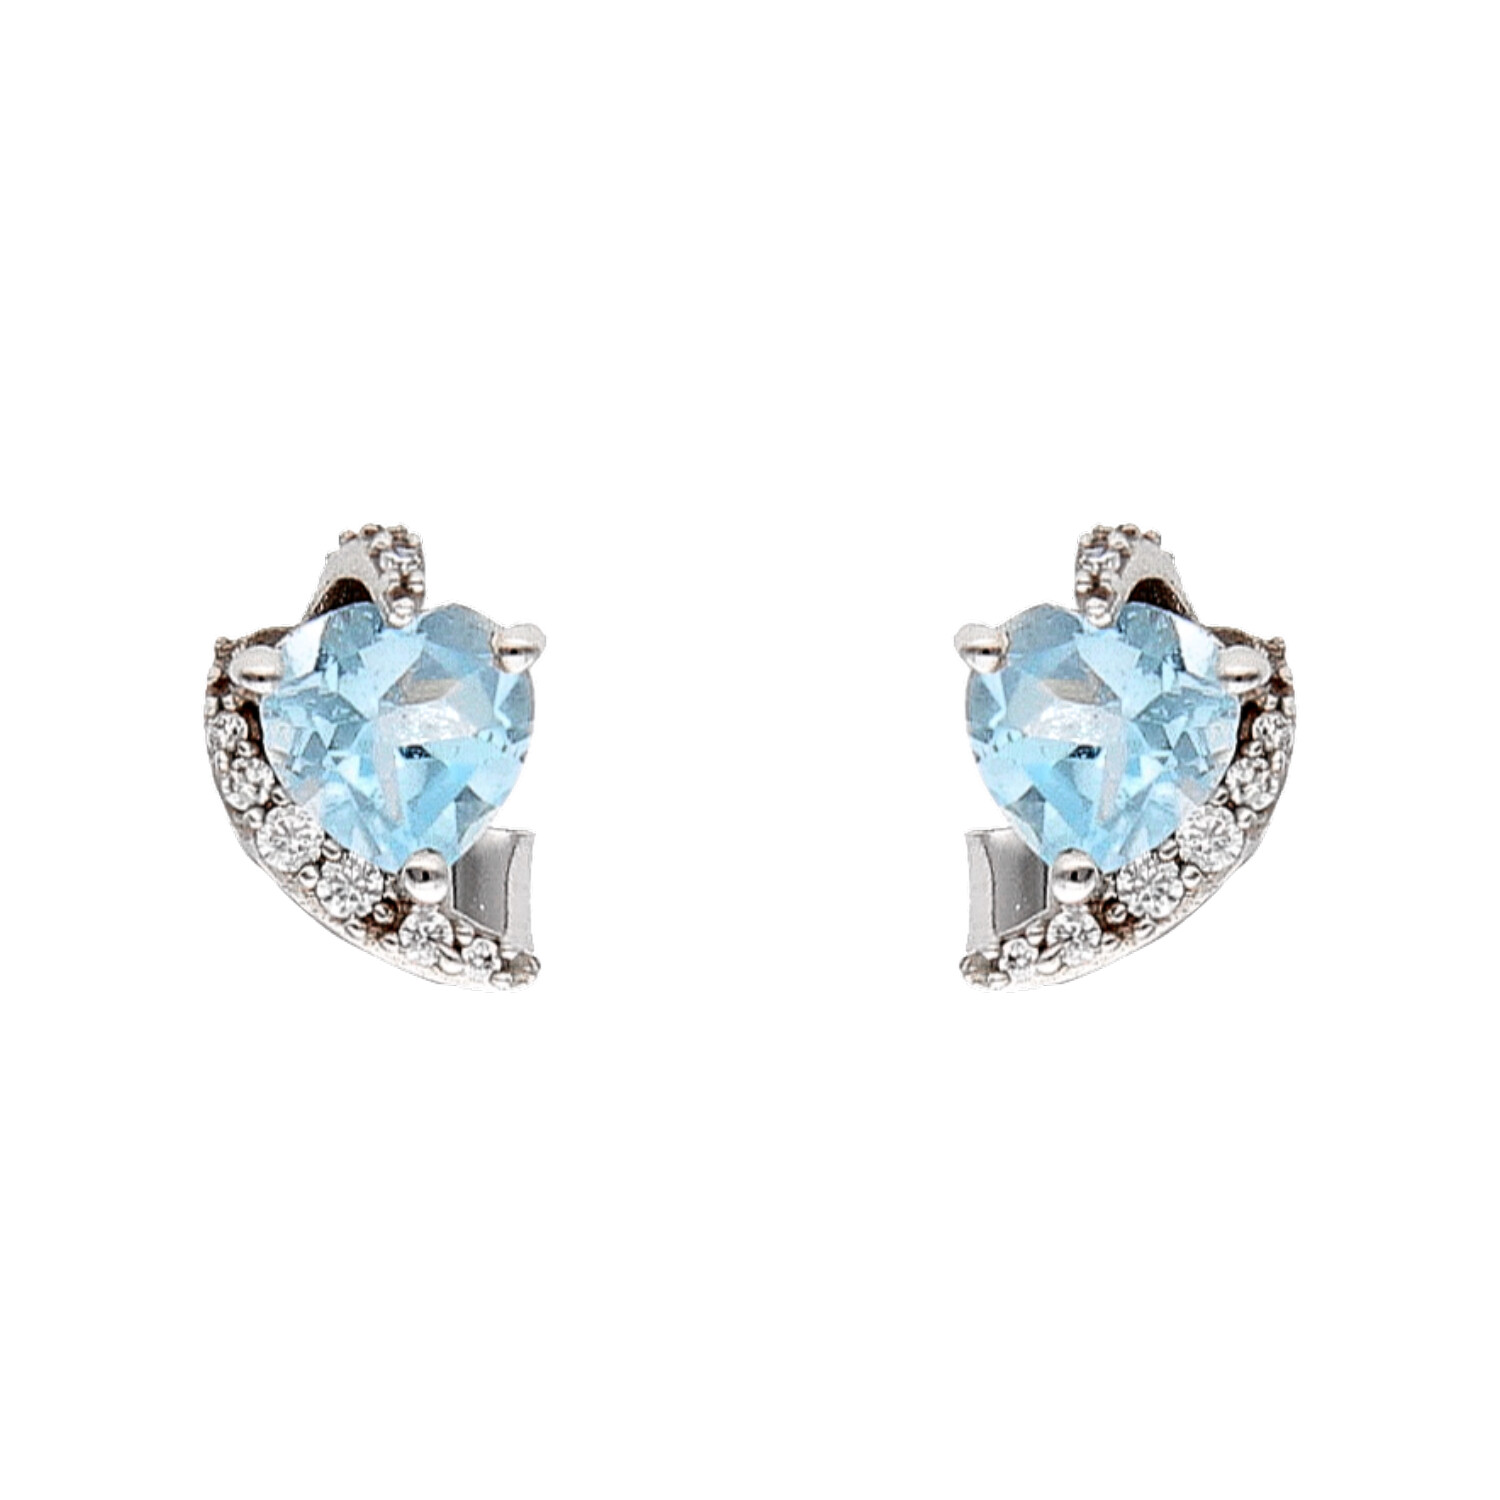 White gold earrings with blue stone and zircons